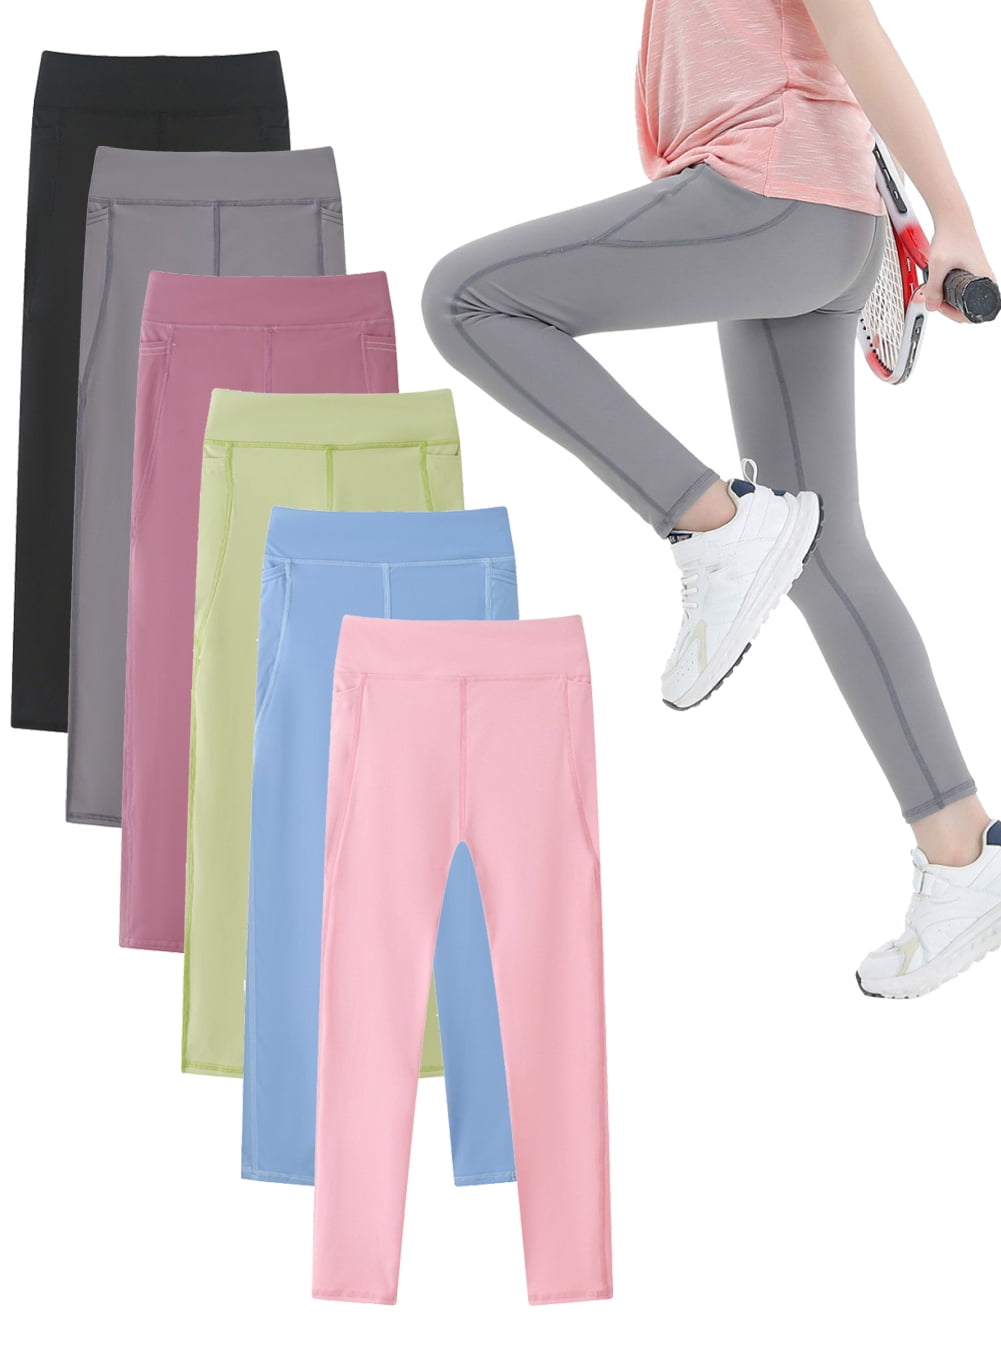 2Pack Girls Athletic Leggings Kids Dance Workout Running Yoga High Waisted  Tights Leggins Pants with Pocket 4-13Y